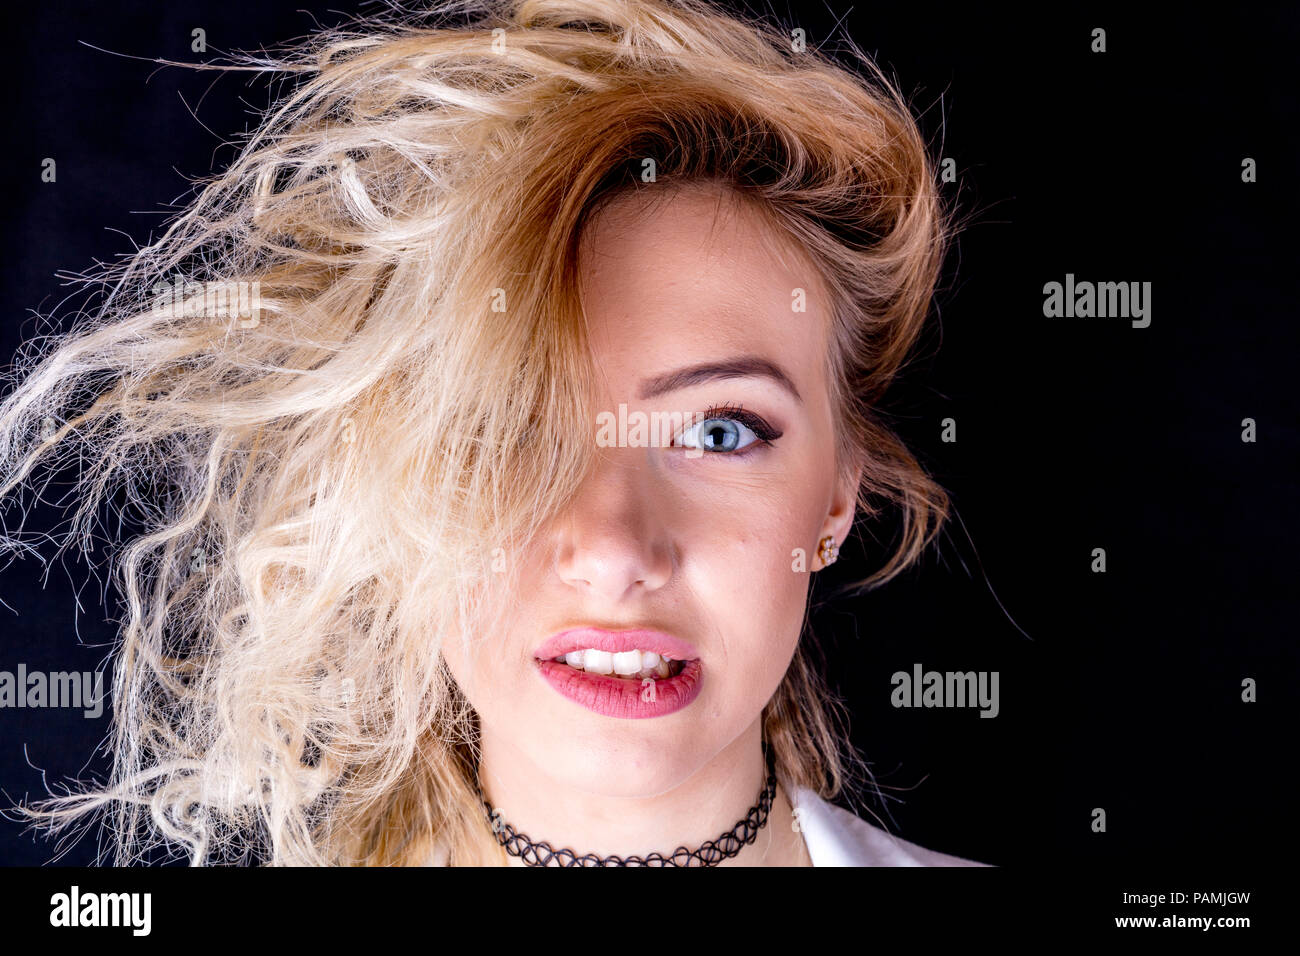 Messy hair, bad hair day, wild hair, untamed hair, out of control hair, funny hair, hair, messy, wild, bad, bad hair, style, hairstyle, unusual, Stock Photo